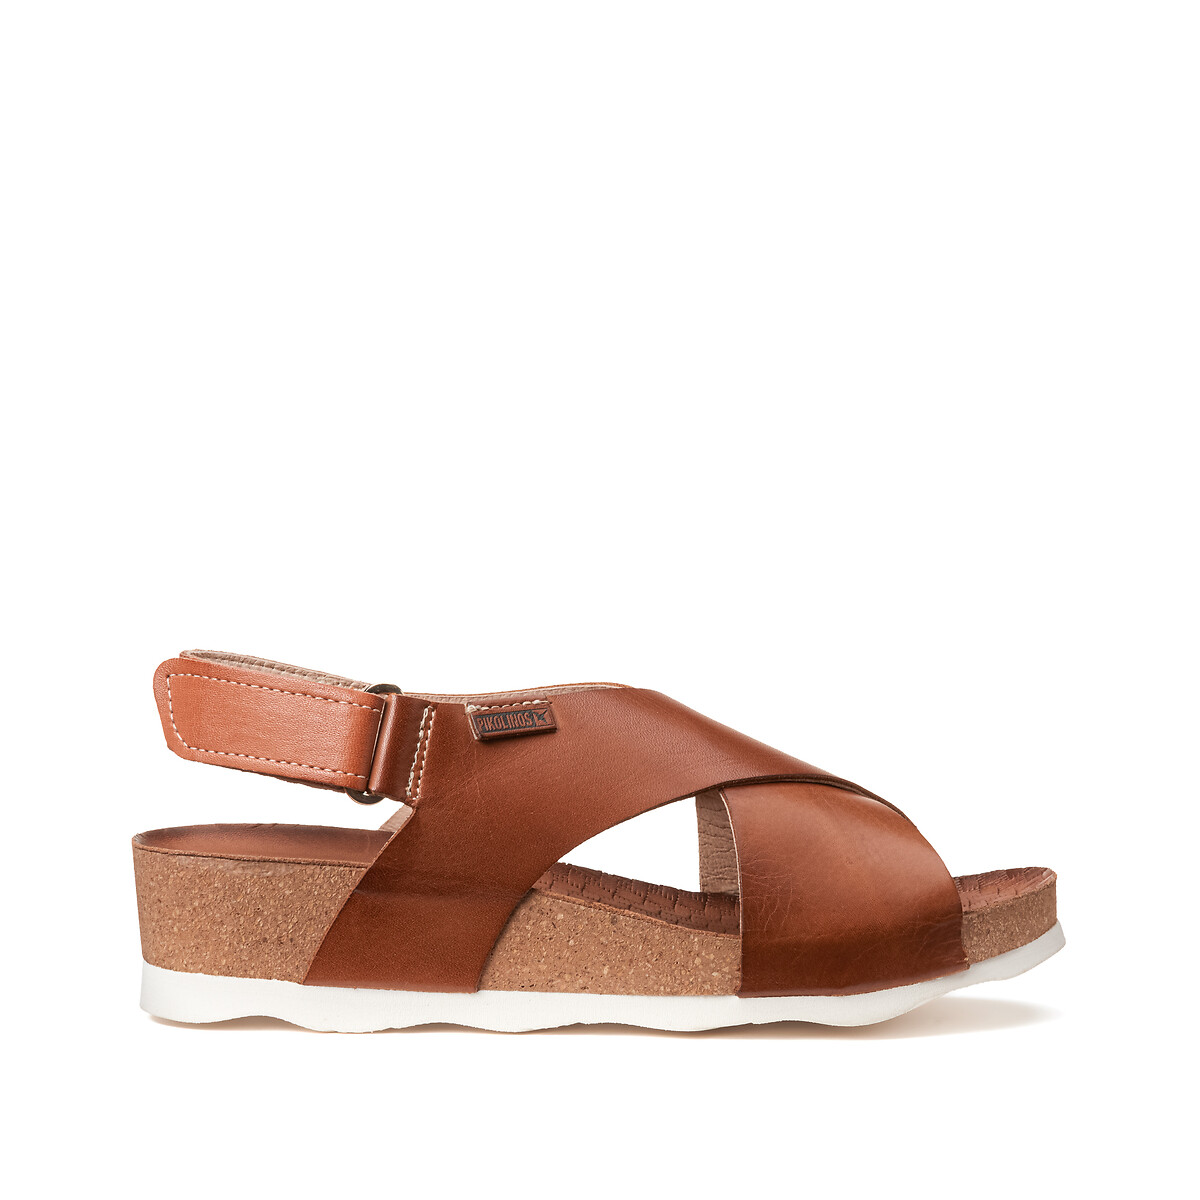 Mahon Leather Sandals with Wedge Heel